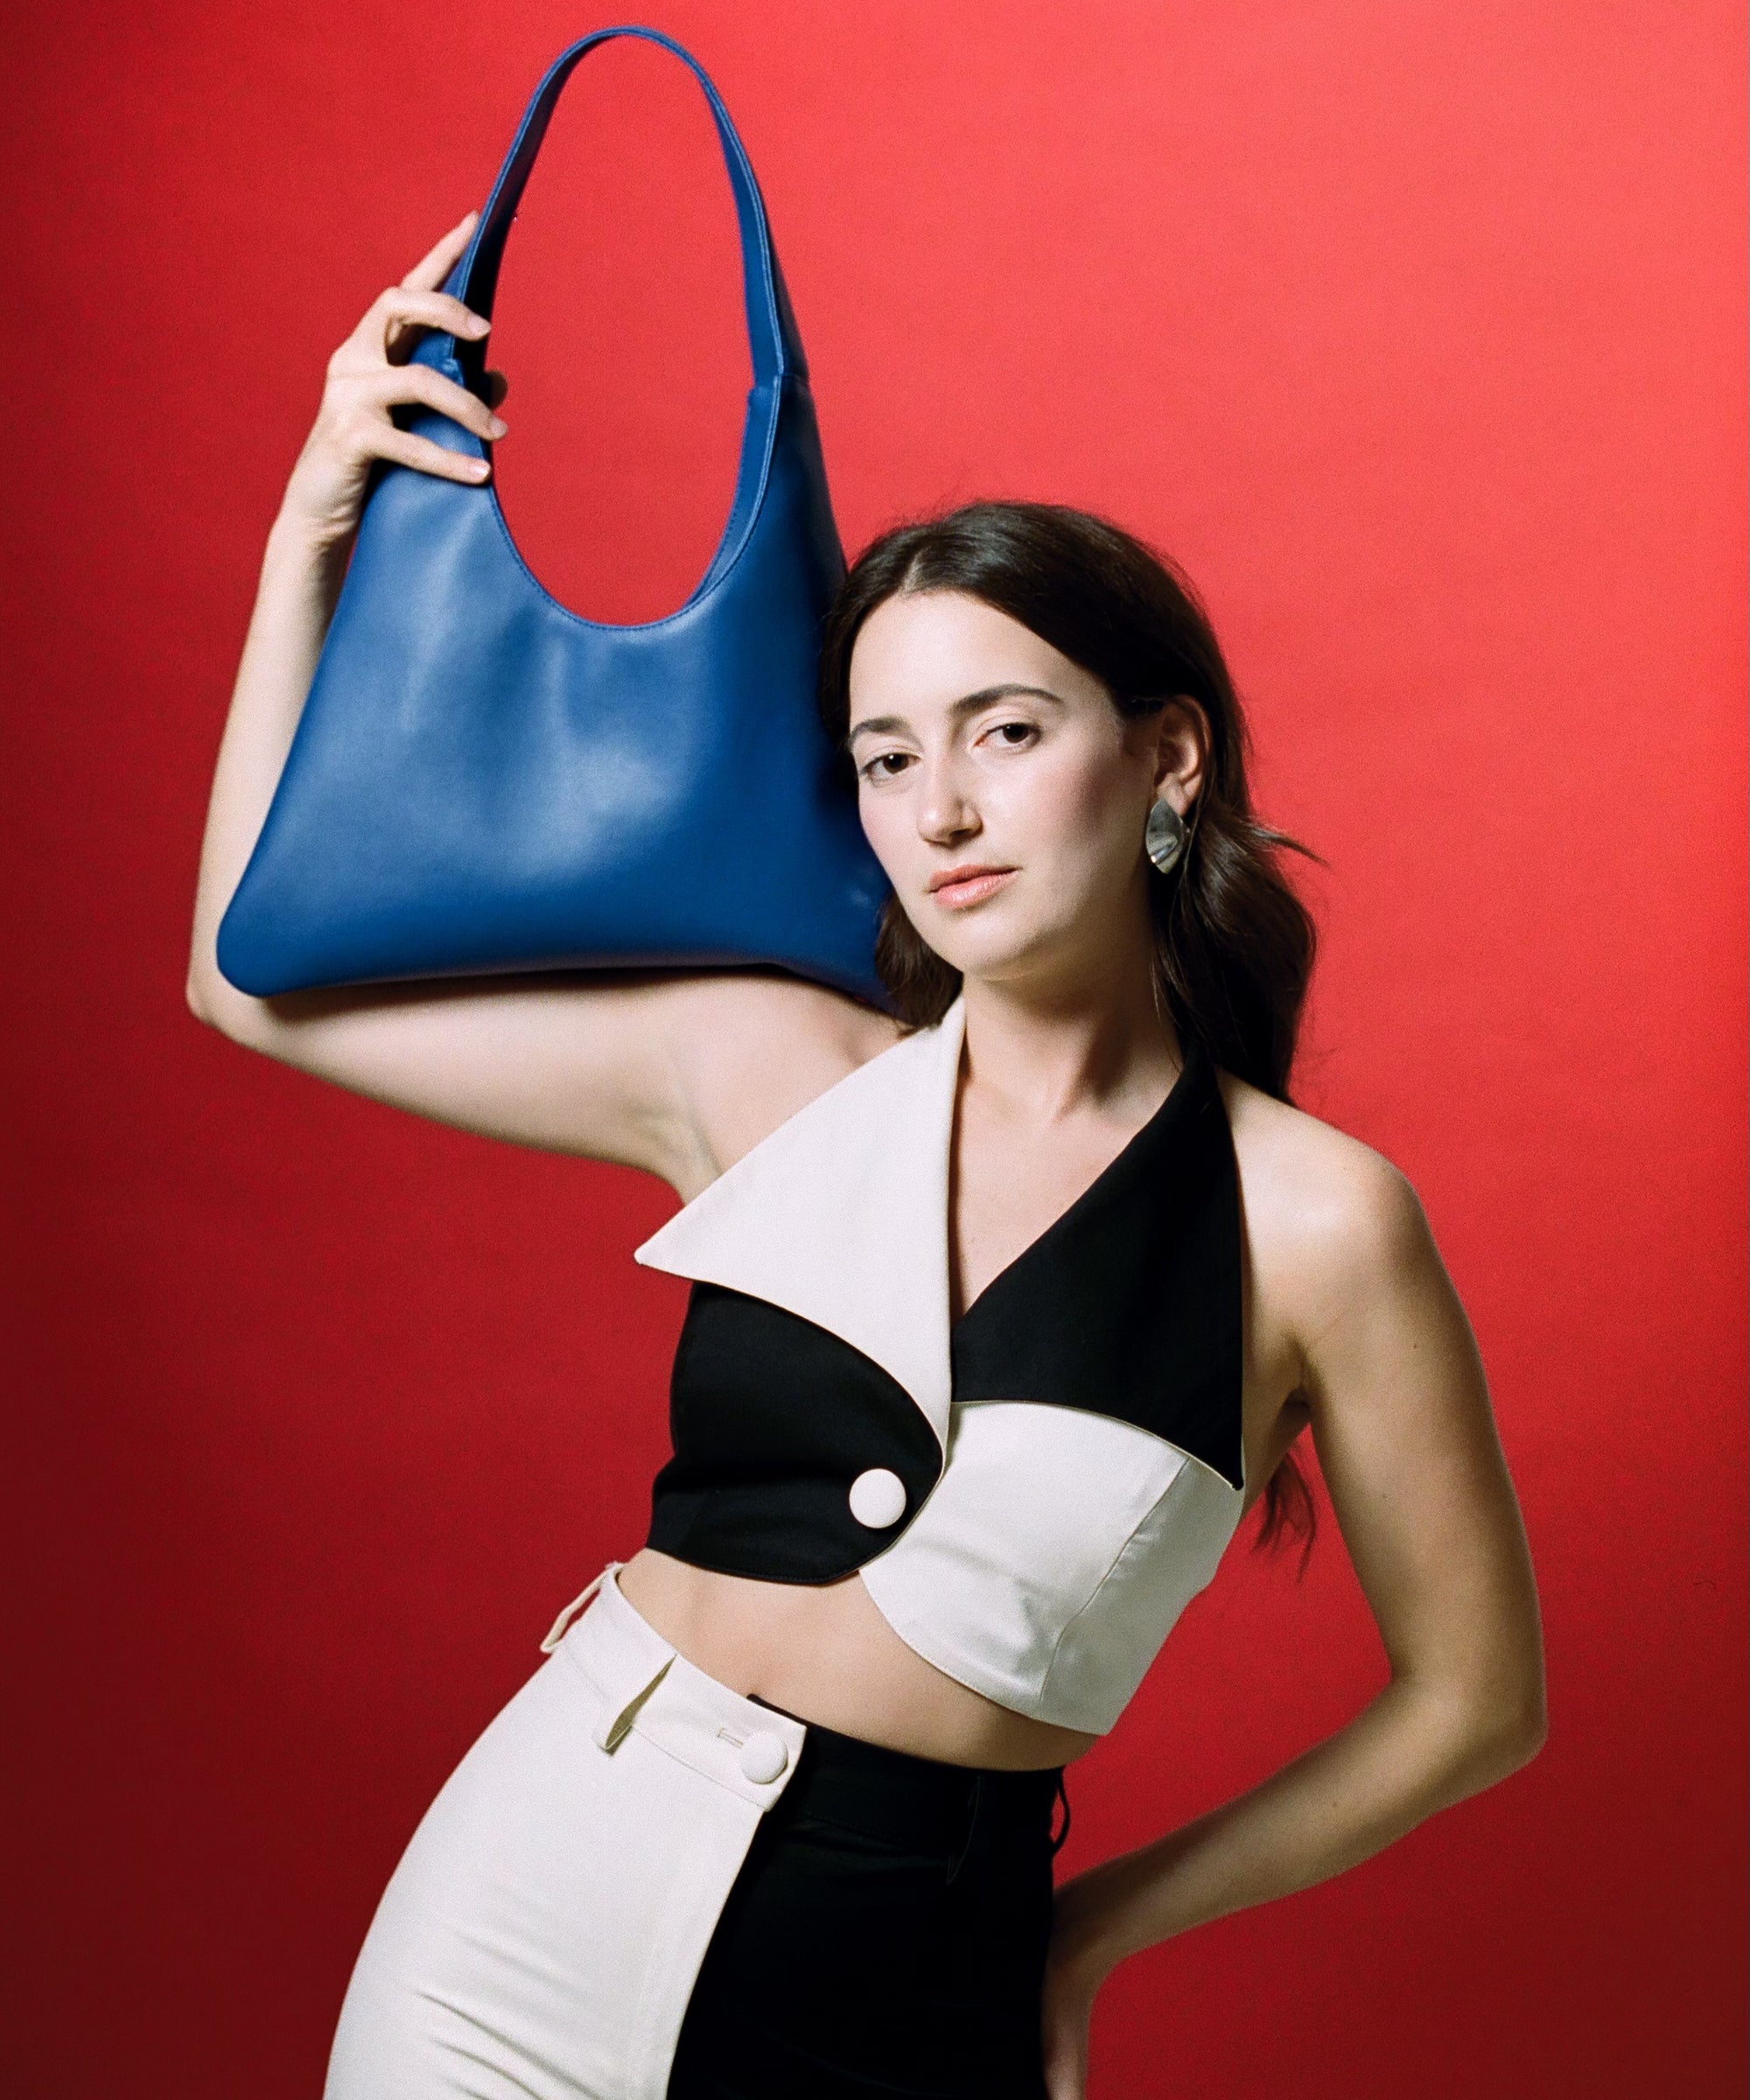 Designer Collaborations: The Most Iconic Bags